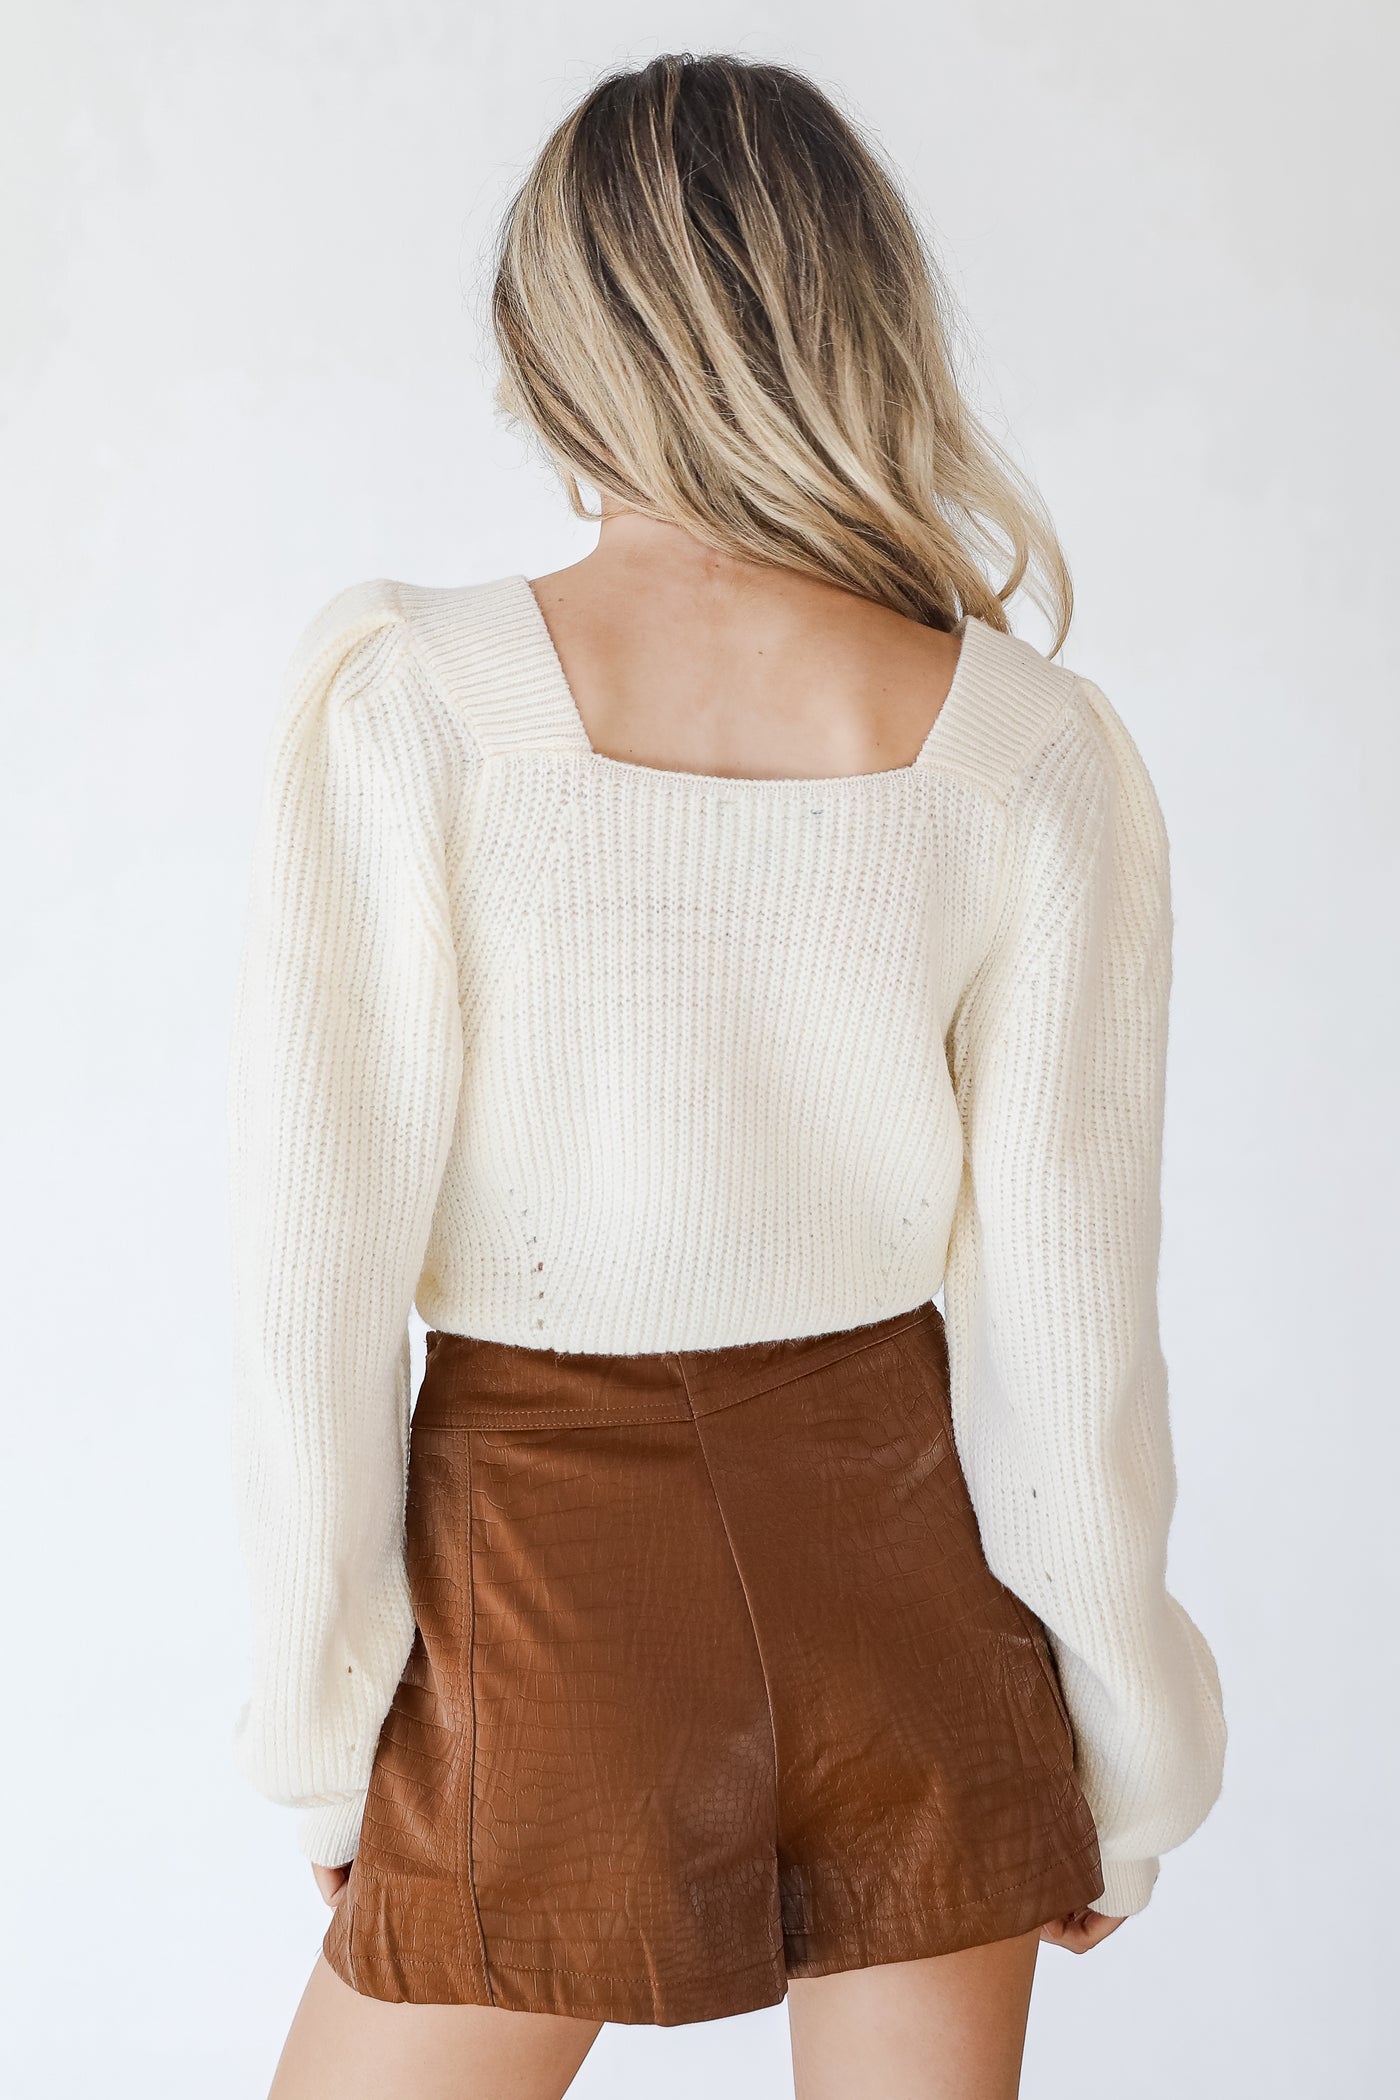 Faux Leather Shorts in camel back view